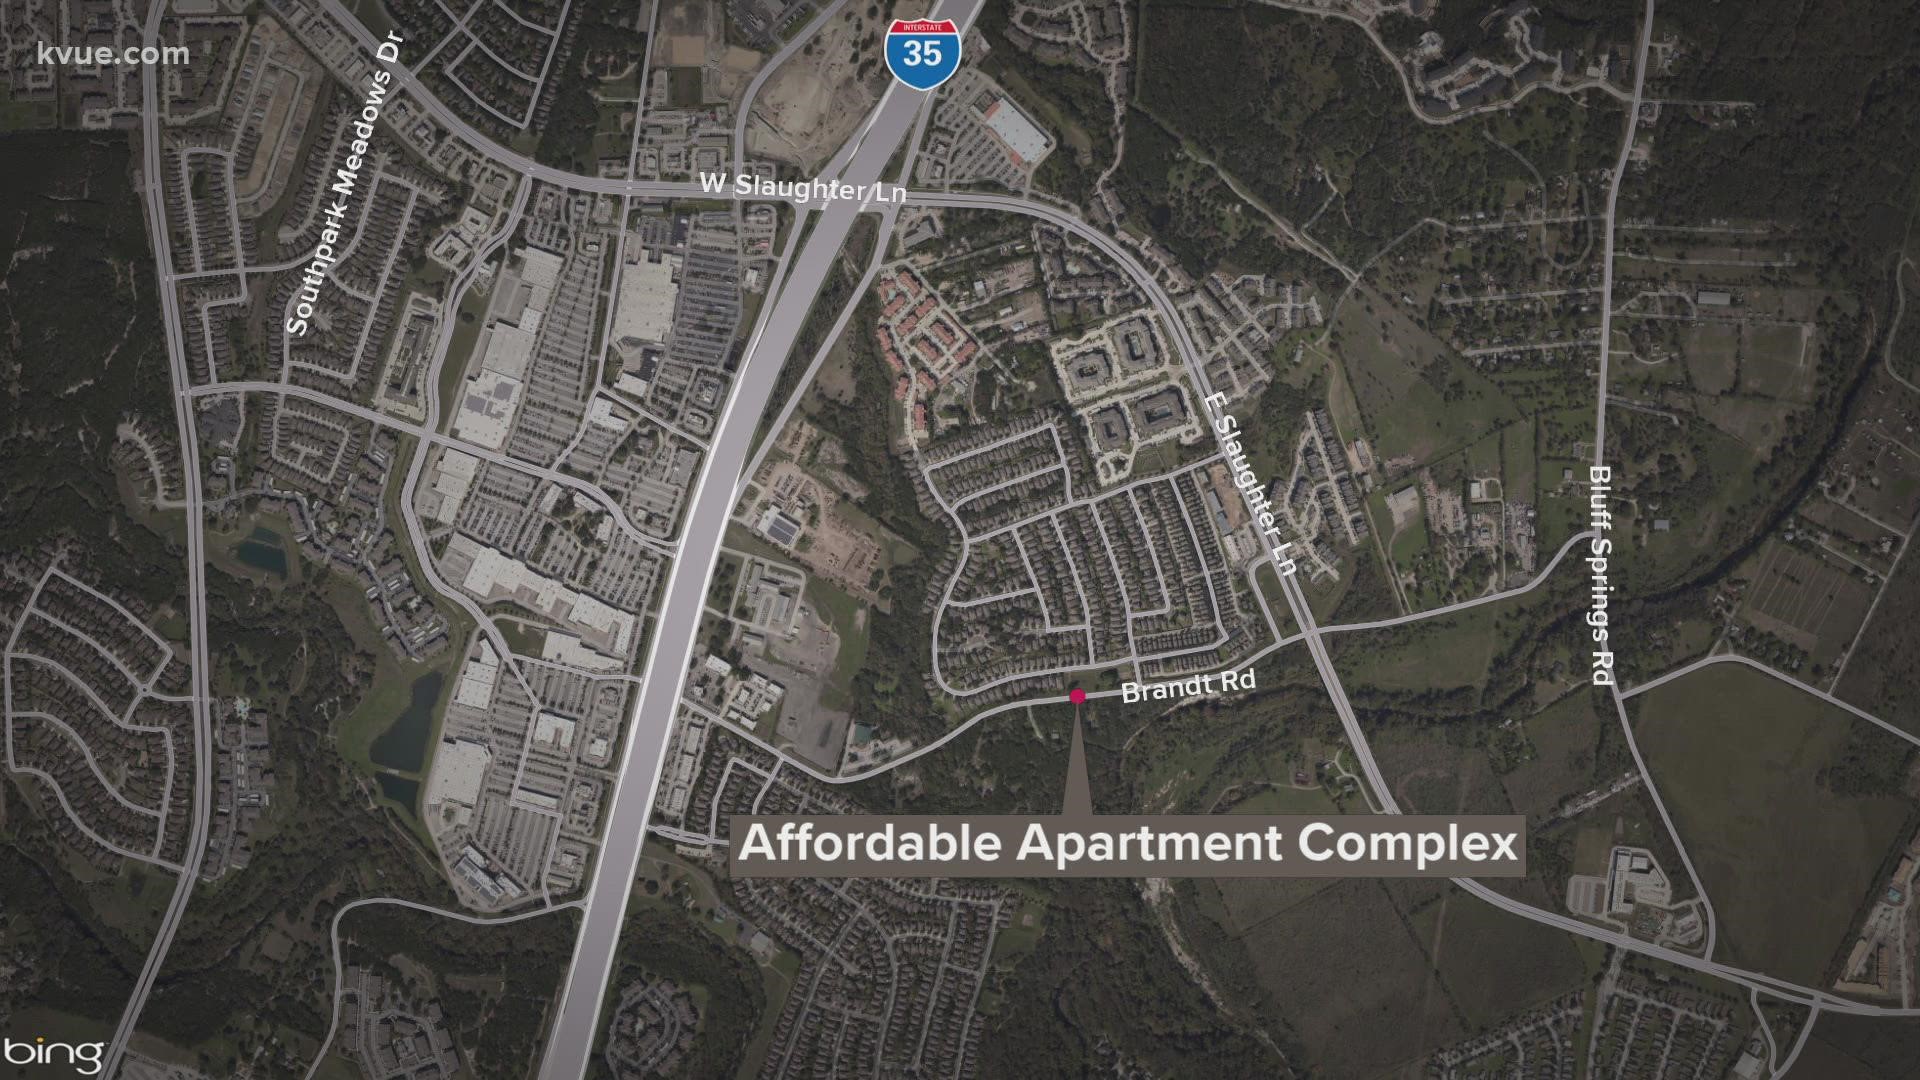 Austin leaders are moving forward with a plan to build an affordable housing complex in South Austin.